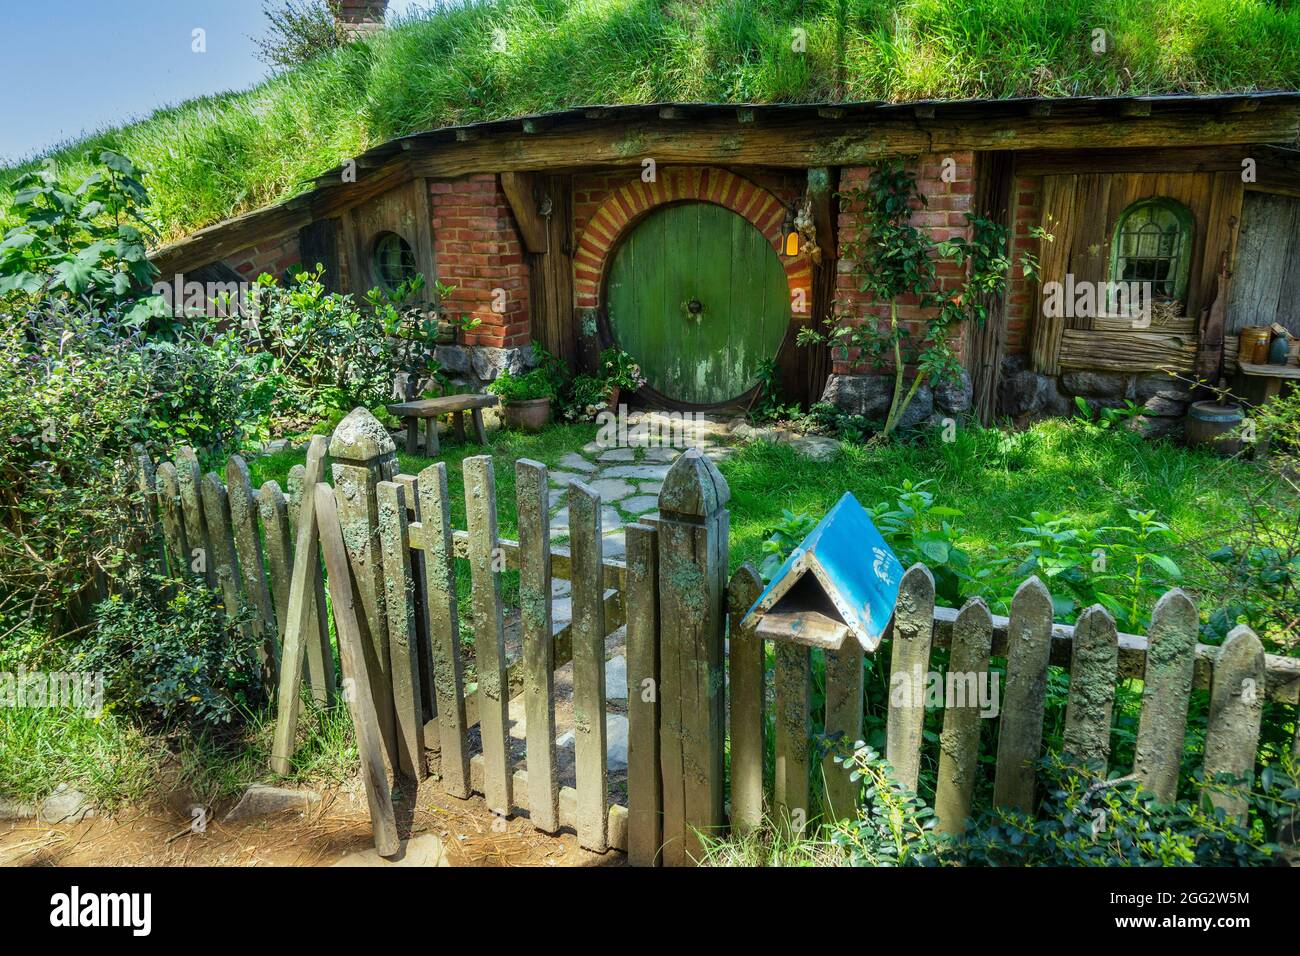 Green Door Hobbit Hole Home On the Hobbiton Movie Set for the Lord of the Rings Movie Trilogy à Matamata Nouvelle-Zélande UNE attraction touristique populaire Banque D'Images